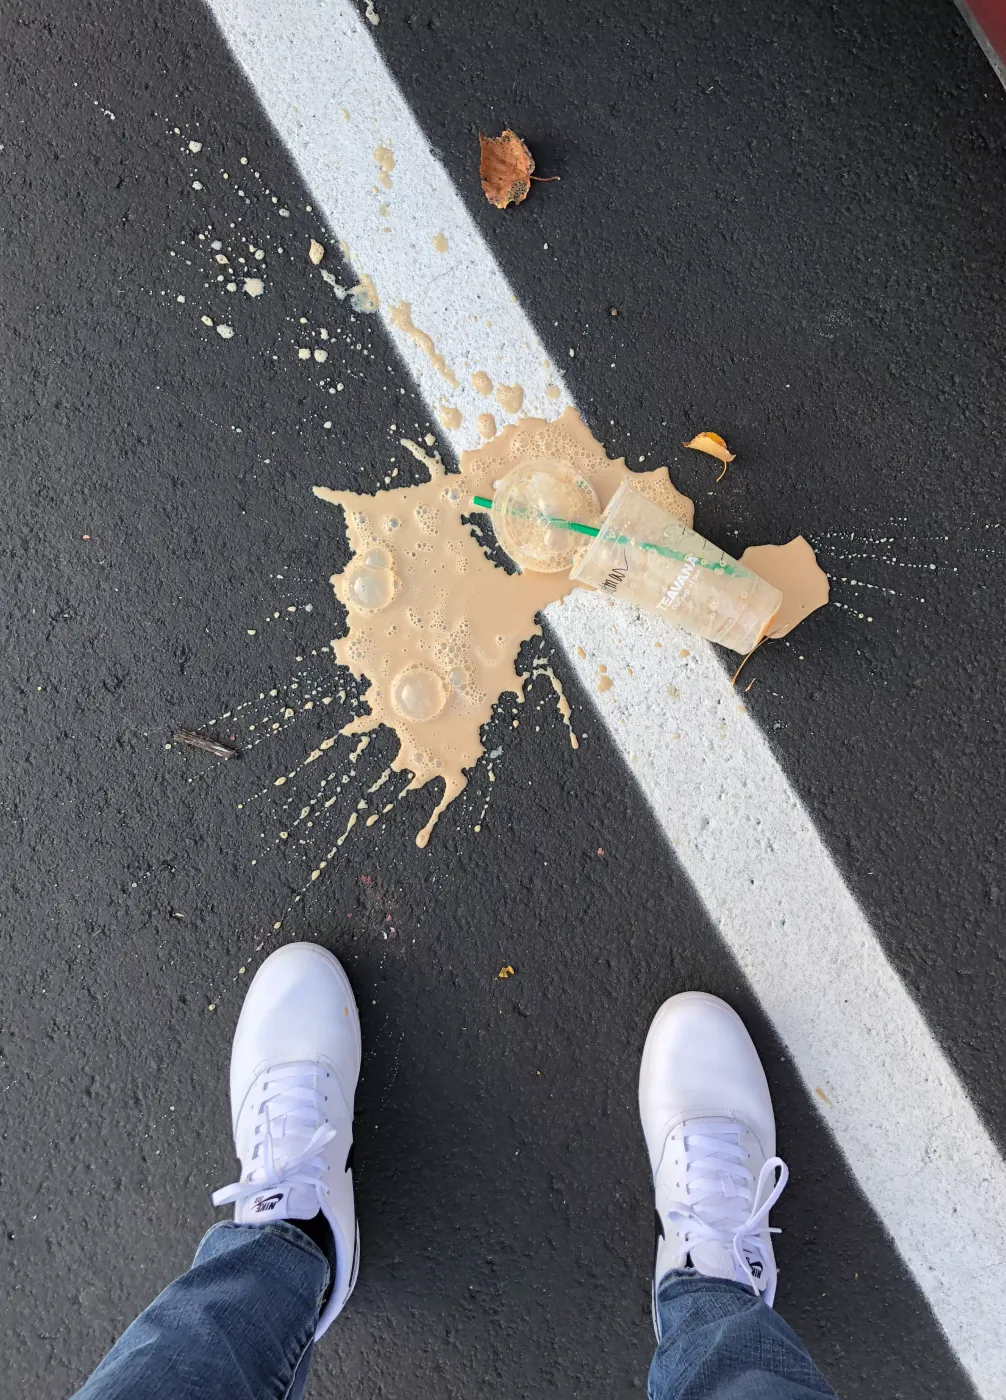 Coffee spilled on the street